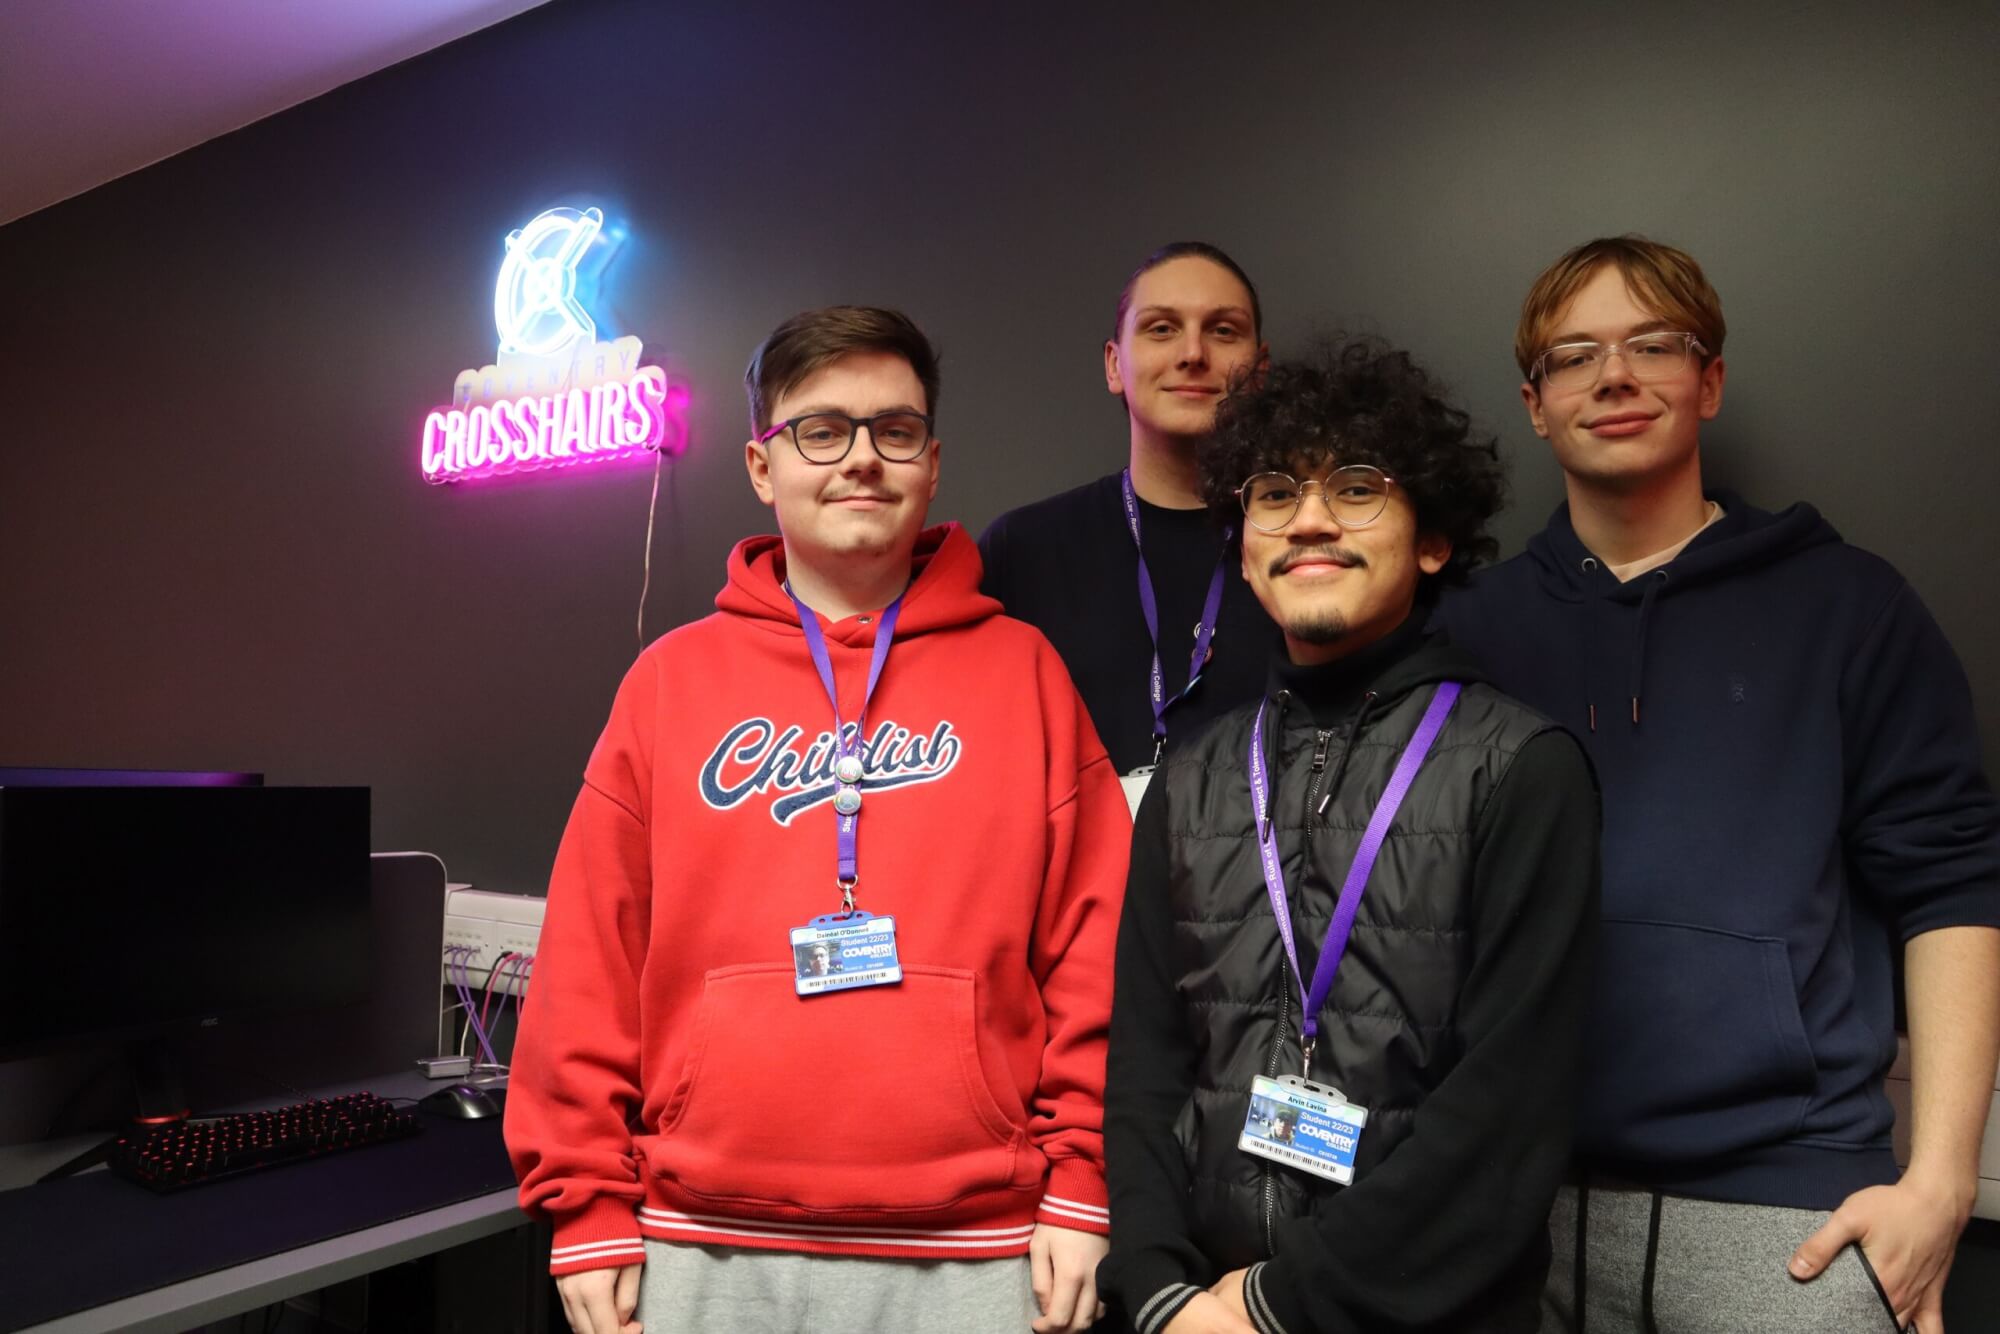 Esports learners who took part in the gigabit cup